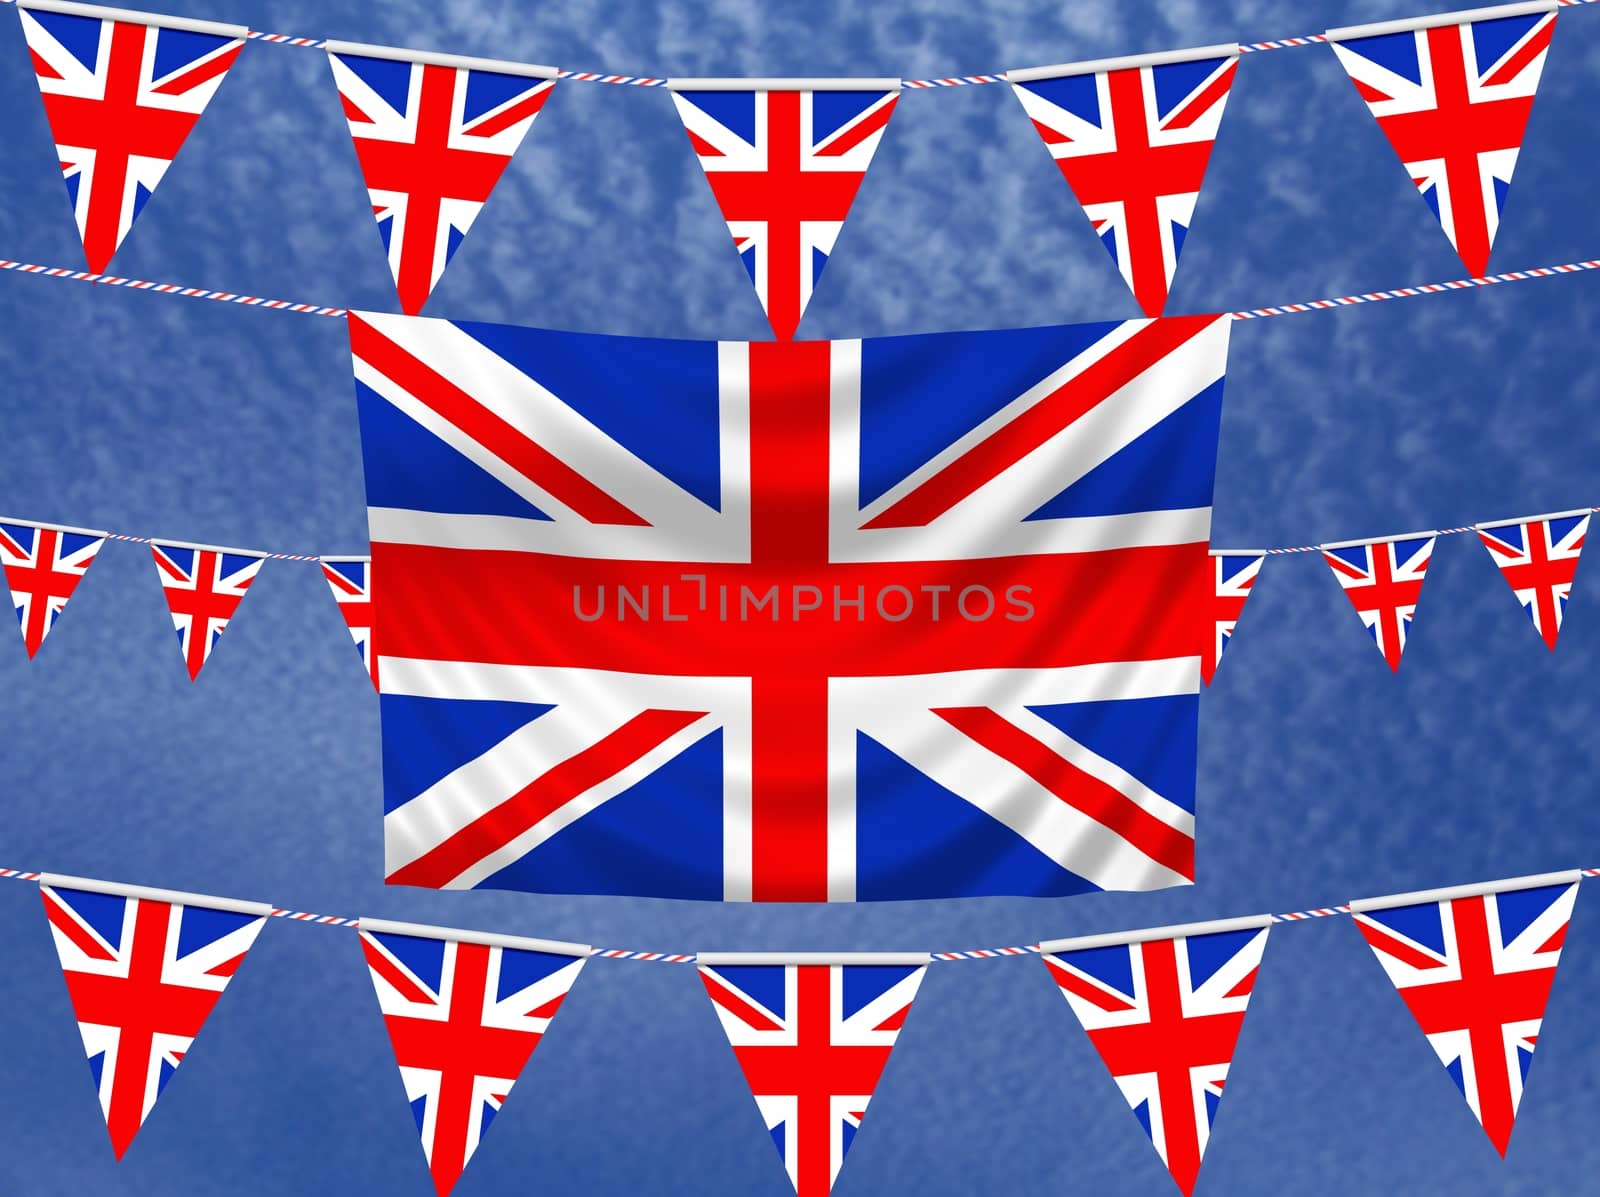 Illustrated flag of the United Kingdom with bunting and a sky background